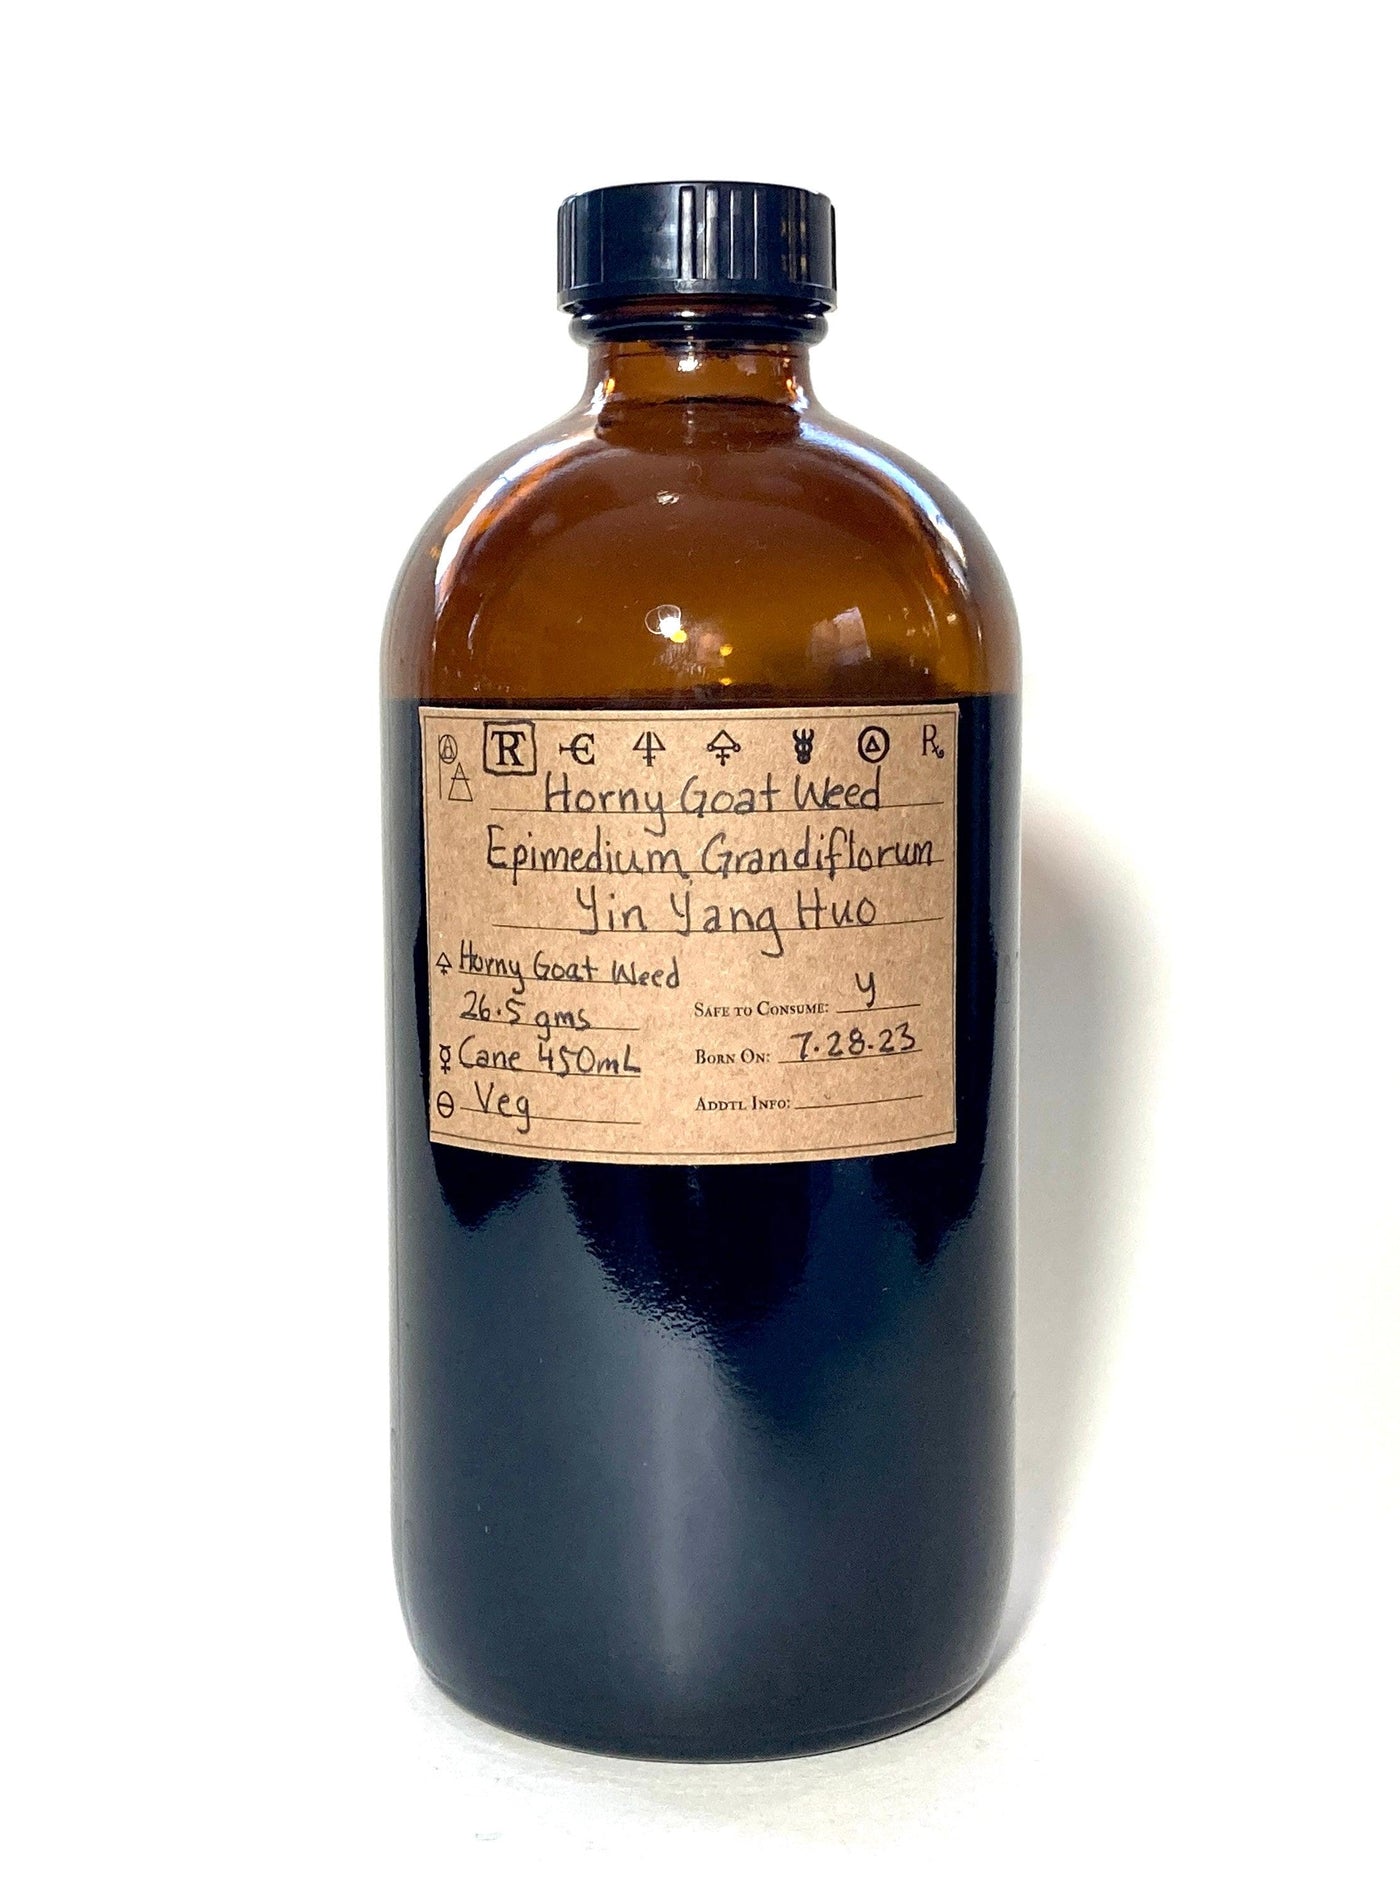 Horny Goat Weed Spagyric Tincture